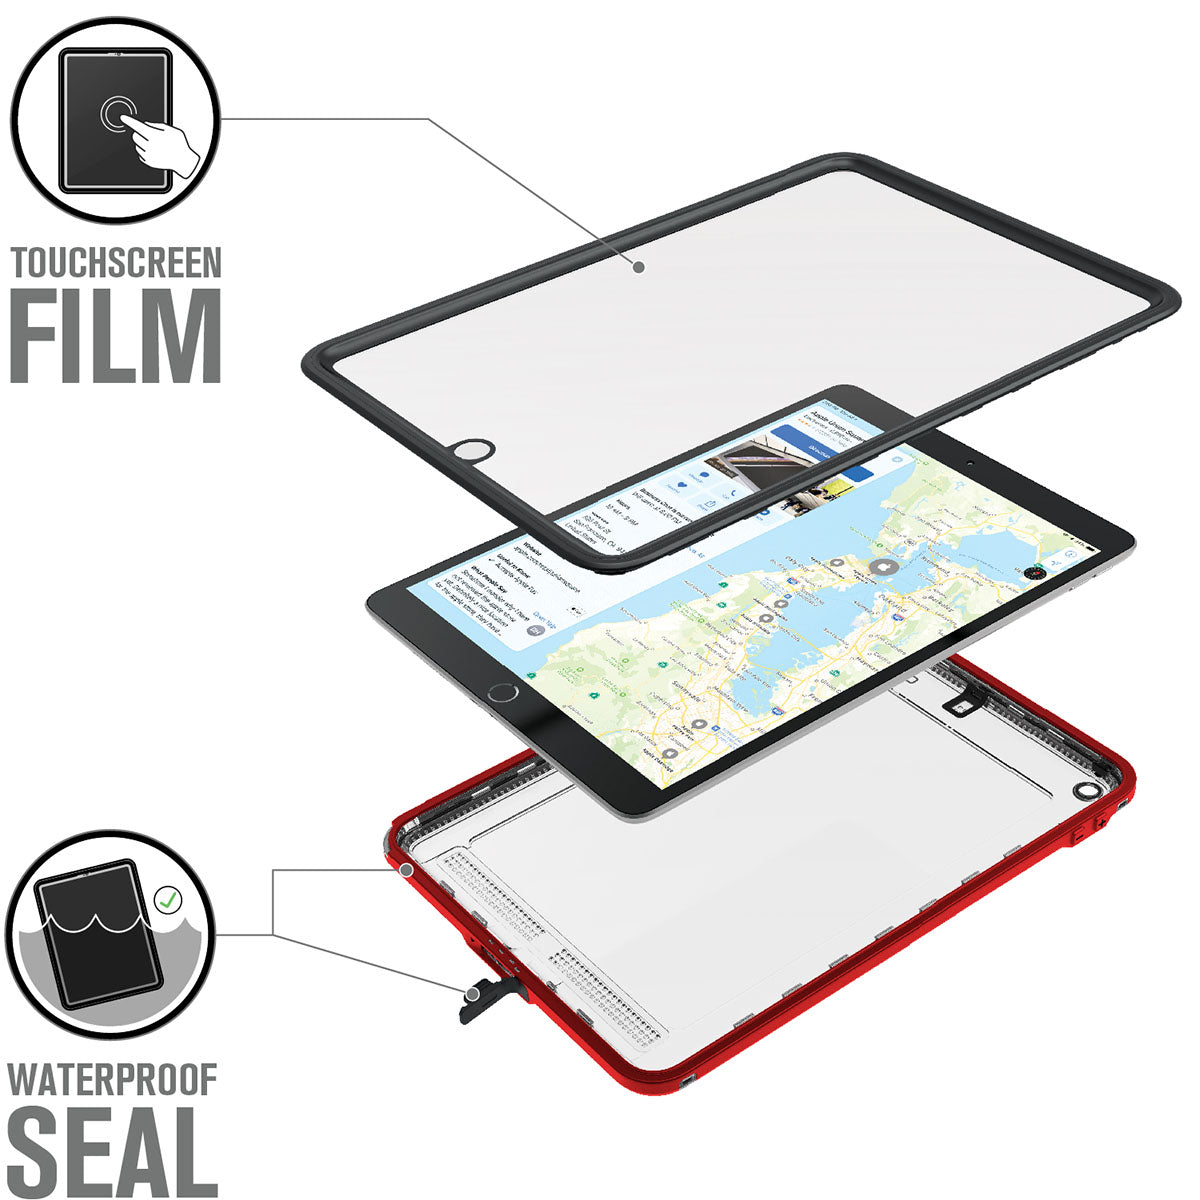 catalyst ipad air gen 3 10.5 waterproof case flame red disassembled case with ipad text reads touchscreen film waterproof seal